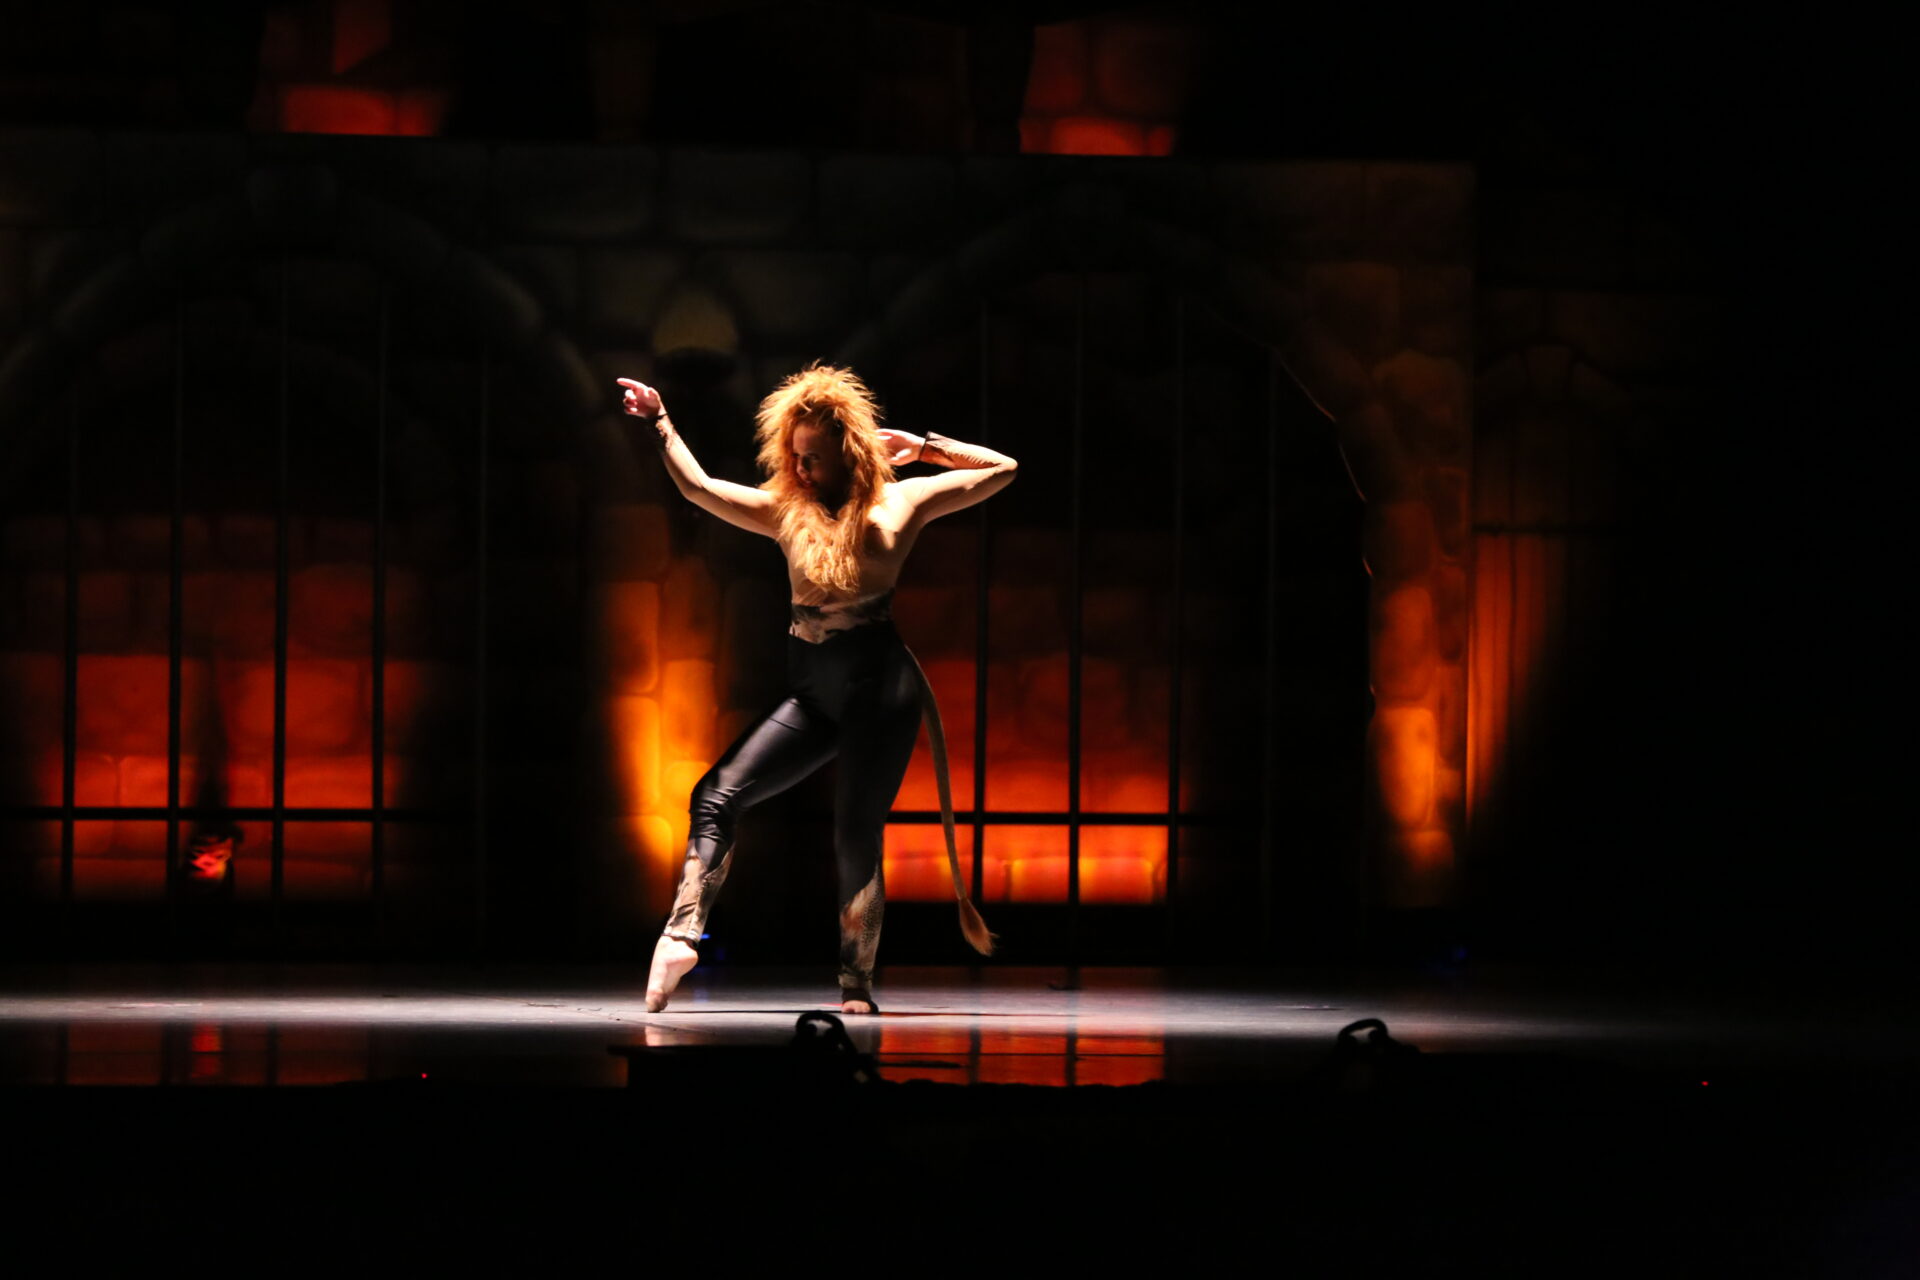 A Woman in Black Costume and Fuzzy Hair Dancing on the Stage